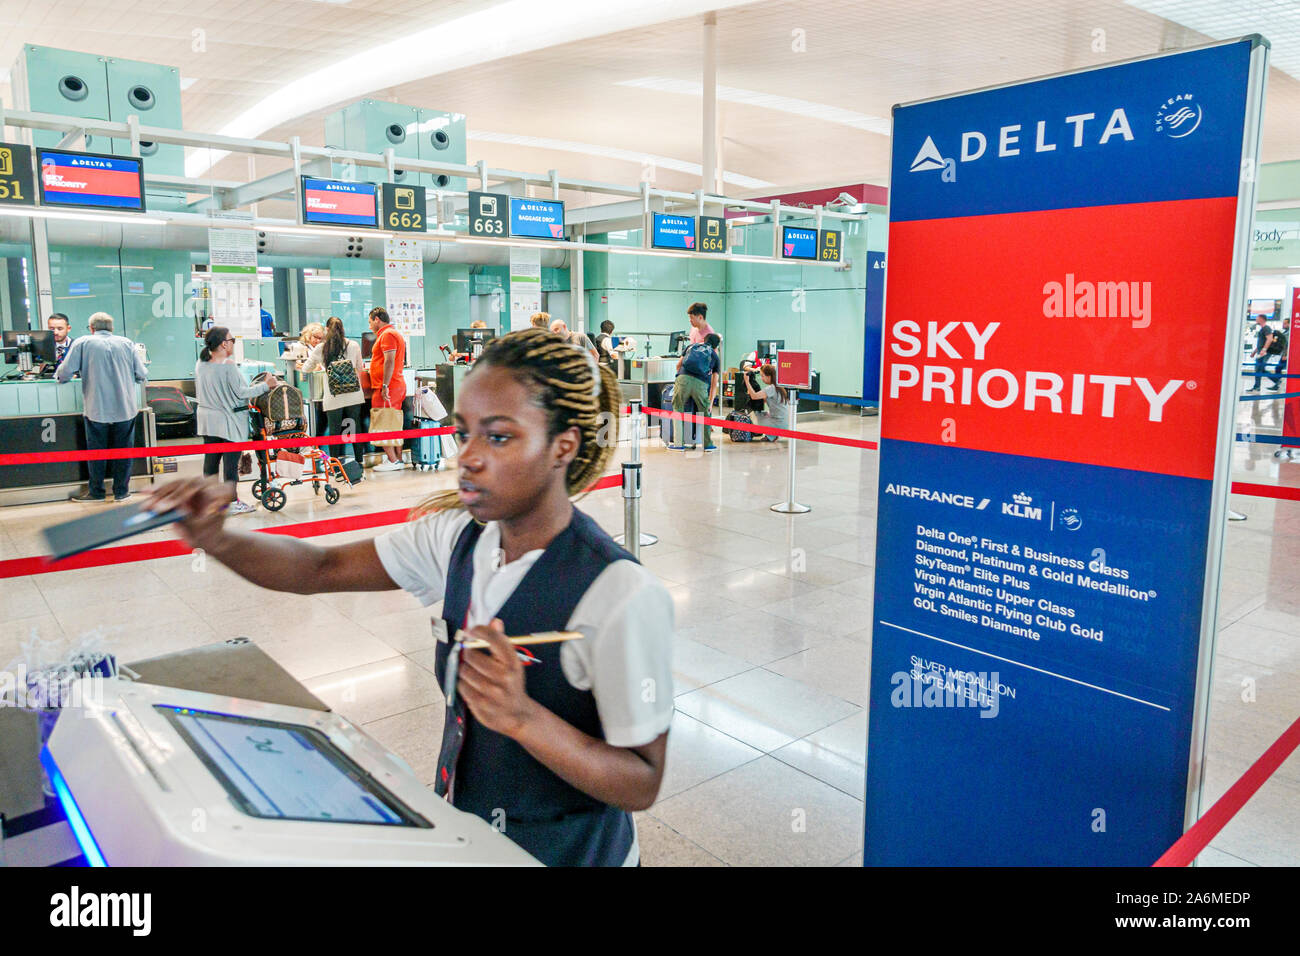 What is Delta Sky Priority? - Next Vacay